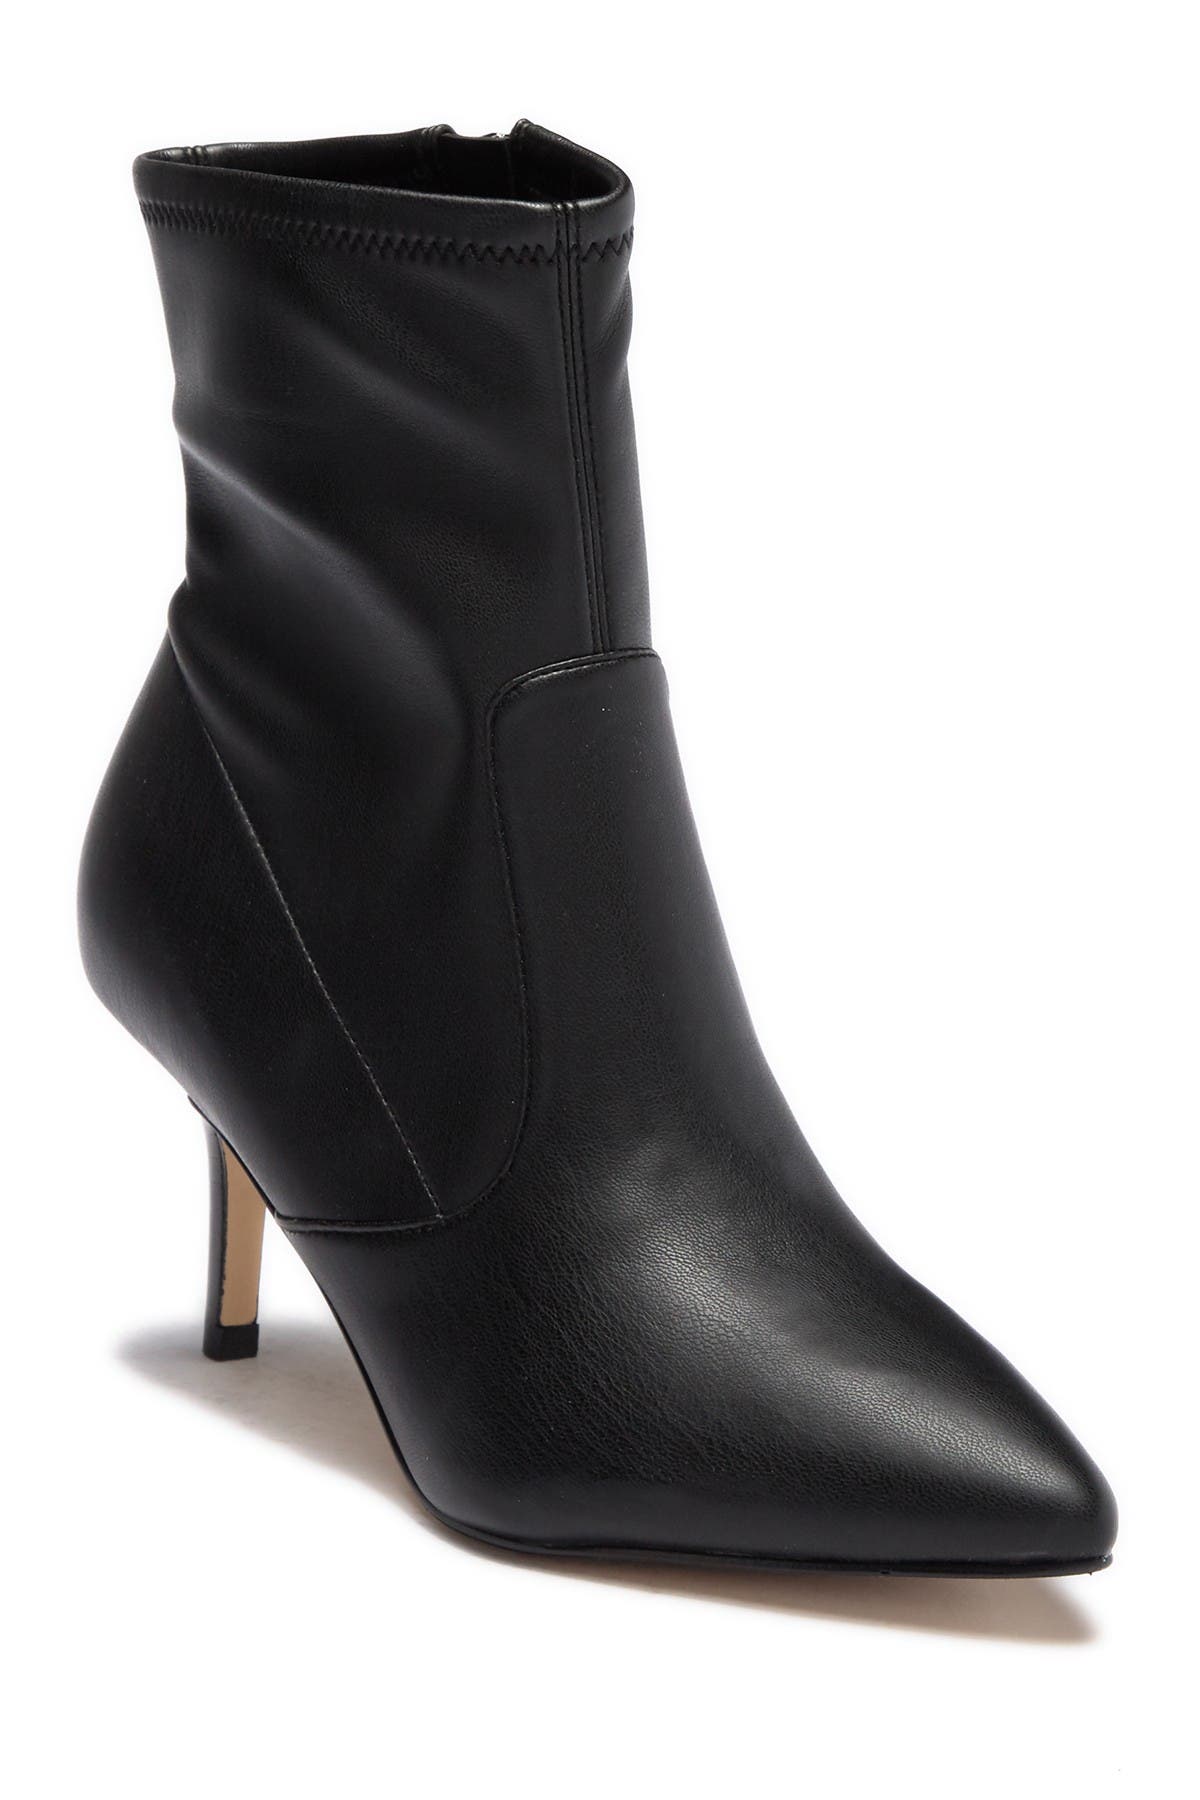 Marc Fisher | Adia Stiletto Ankle Boot 